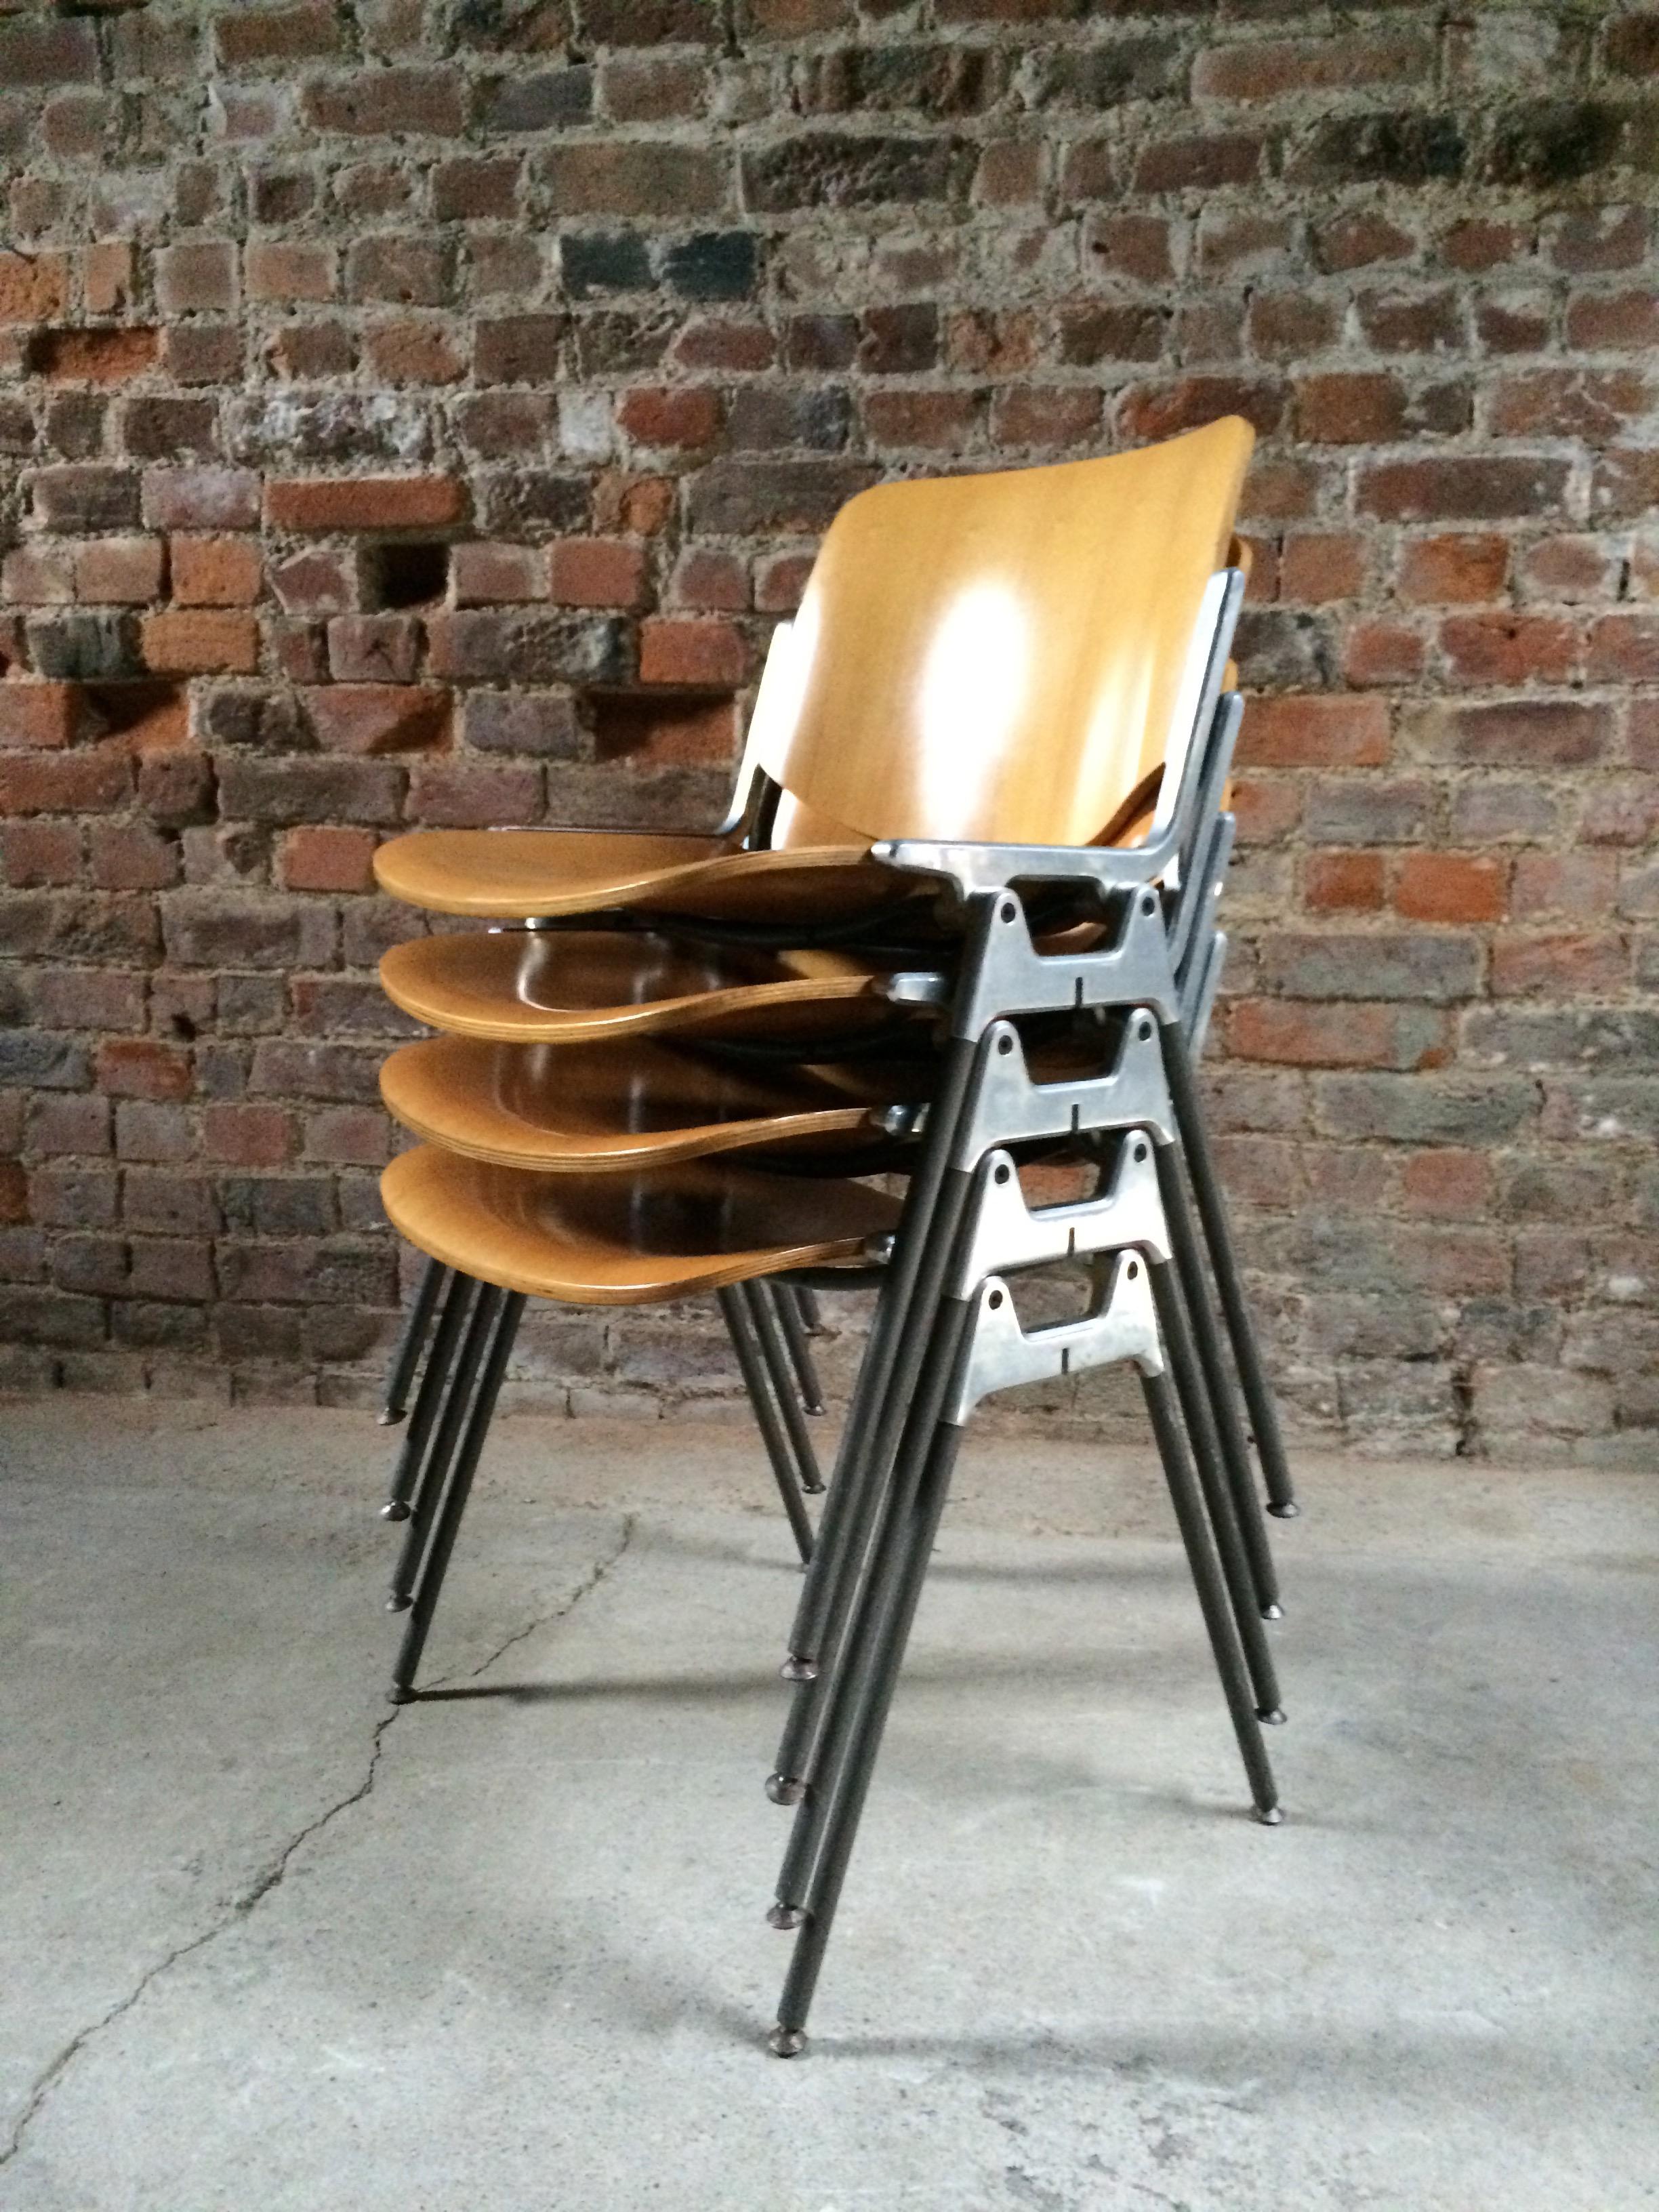 A fabulous set of four midcentury Italian Giancarlo Piretti DSC Axis 106 chairs by Castelli circa 1960s, these fabulous stackable chairs with beech seats and backs on sturdy aluminium bases with tapered legs are the epitome of midcentury design, the